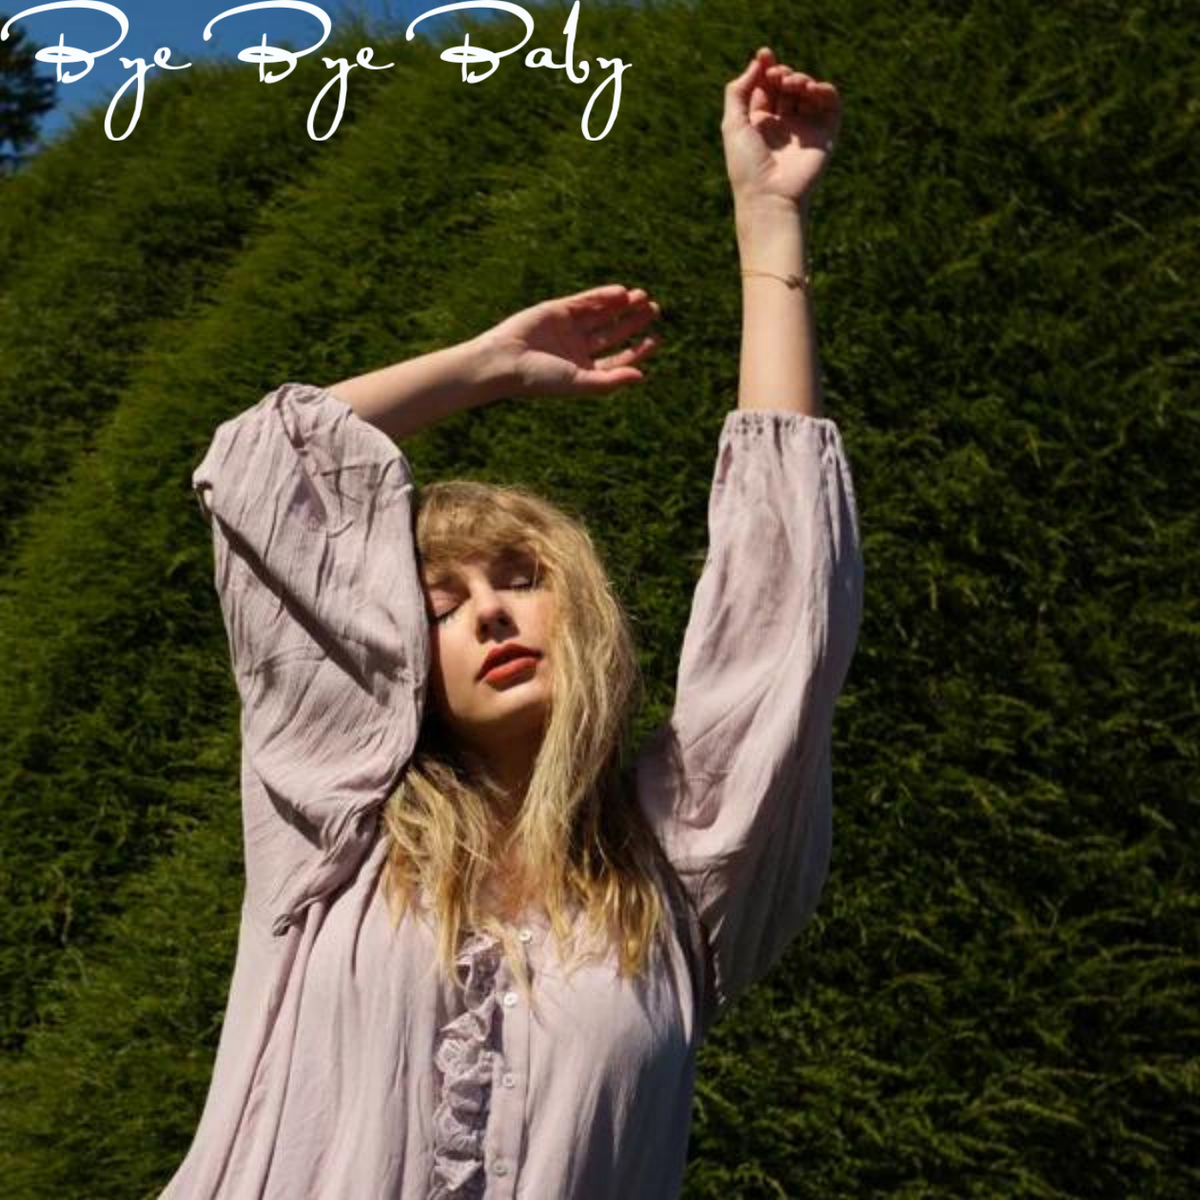 https://static.wikia.nocookie.net/taylor-swift-fanon/images/4/4e/Bye_Bye_Baby_Album_Cover.png/revision/latest/scale-to-width-down/1200?cb=20220111035107